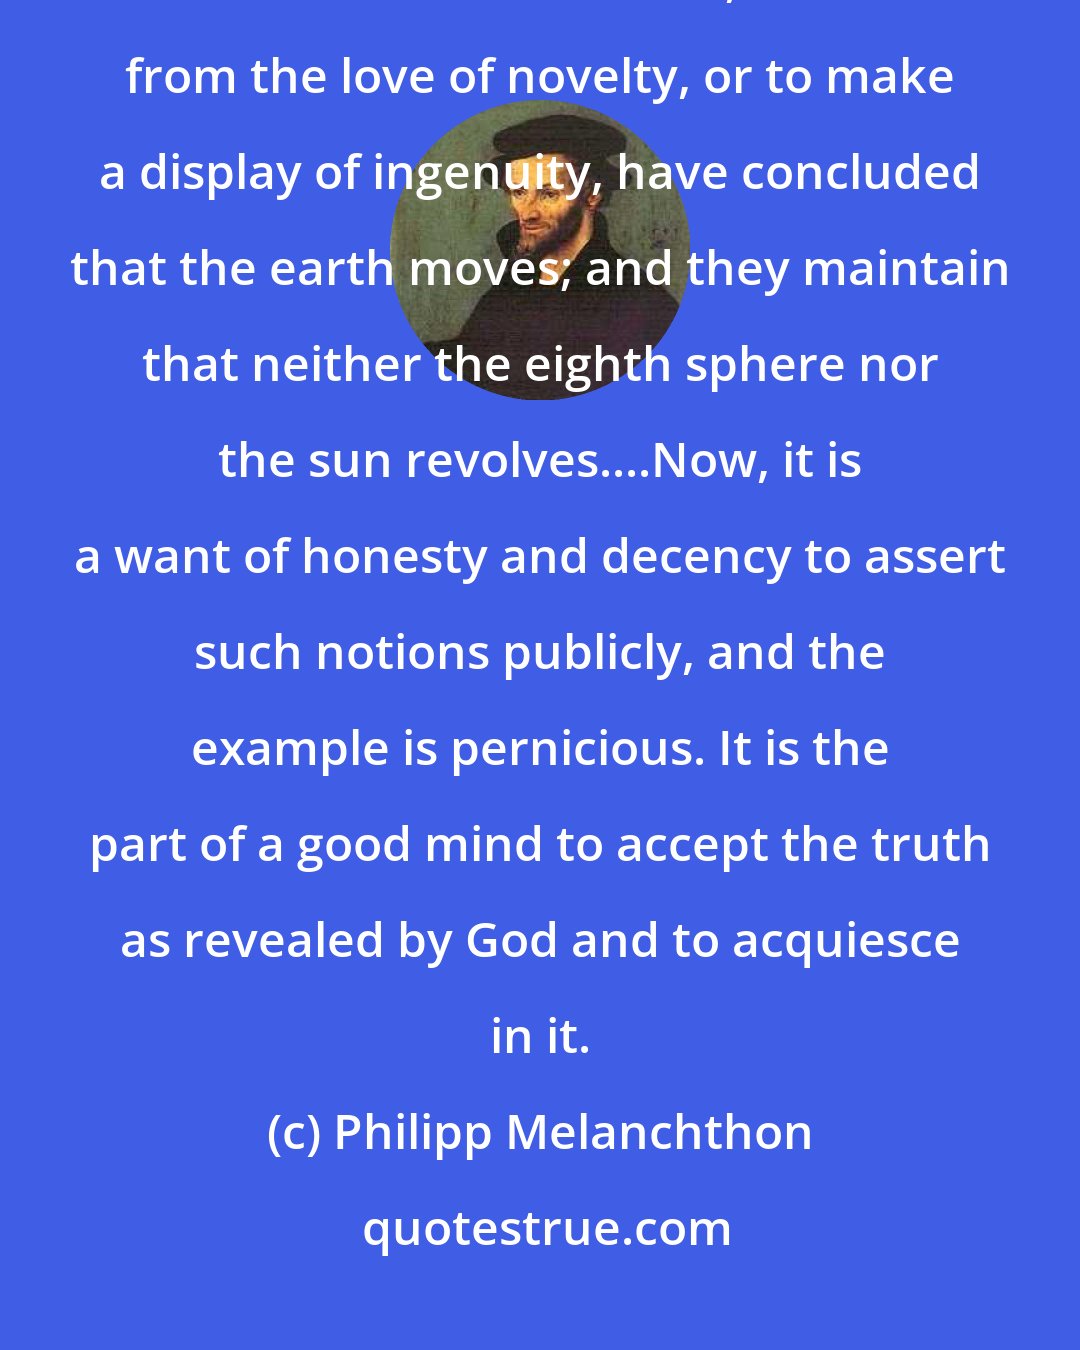 Philipp Melanchthon: The eyes are witnesses that the heavens revolve in the space of twenty- four hours. But certain men, either from the love of novelty, or to make a display of ingenuity, have concluded that the earth moves; and they maintain that neither the eighth sphere nor the sun revolves....Now, it is a want of honesty and decency to assert such notions publicly, and the example is pernicious. It is the part of a good mind to accept the truth as revealed by God and to acquiesce in it.